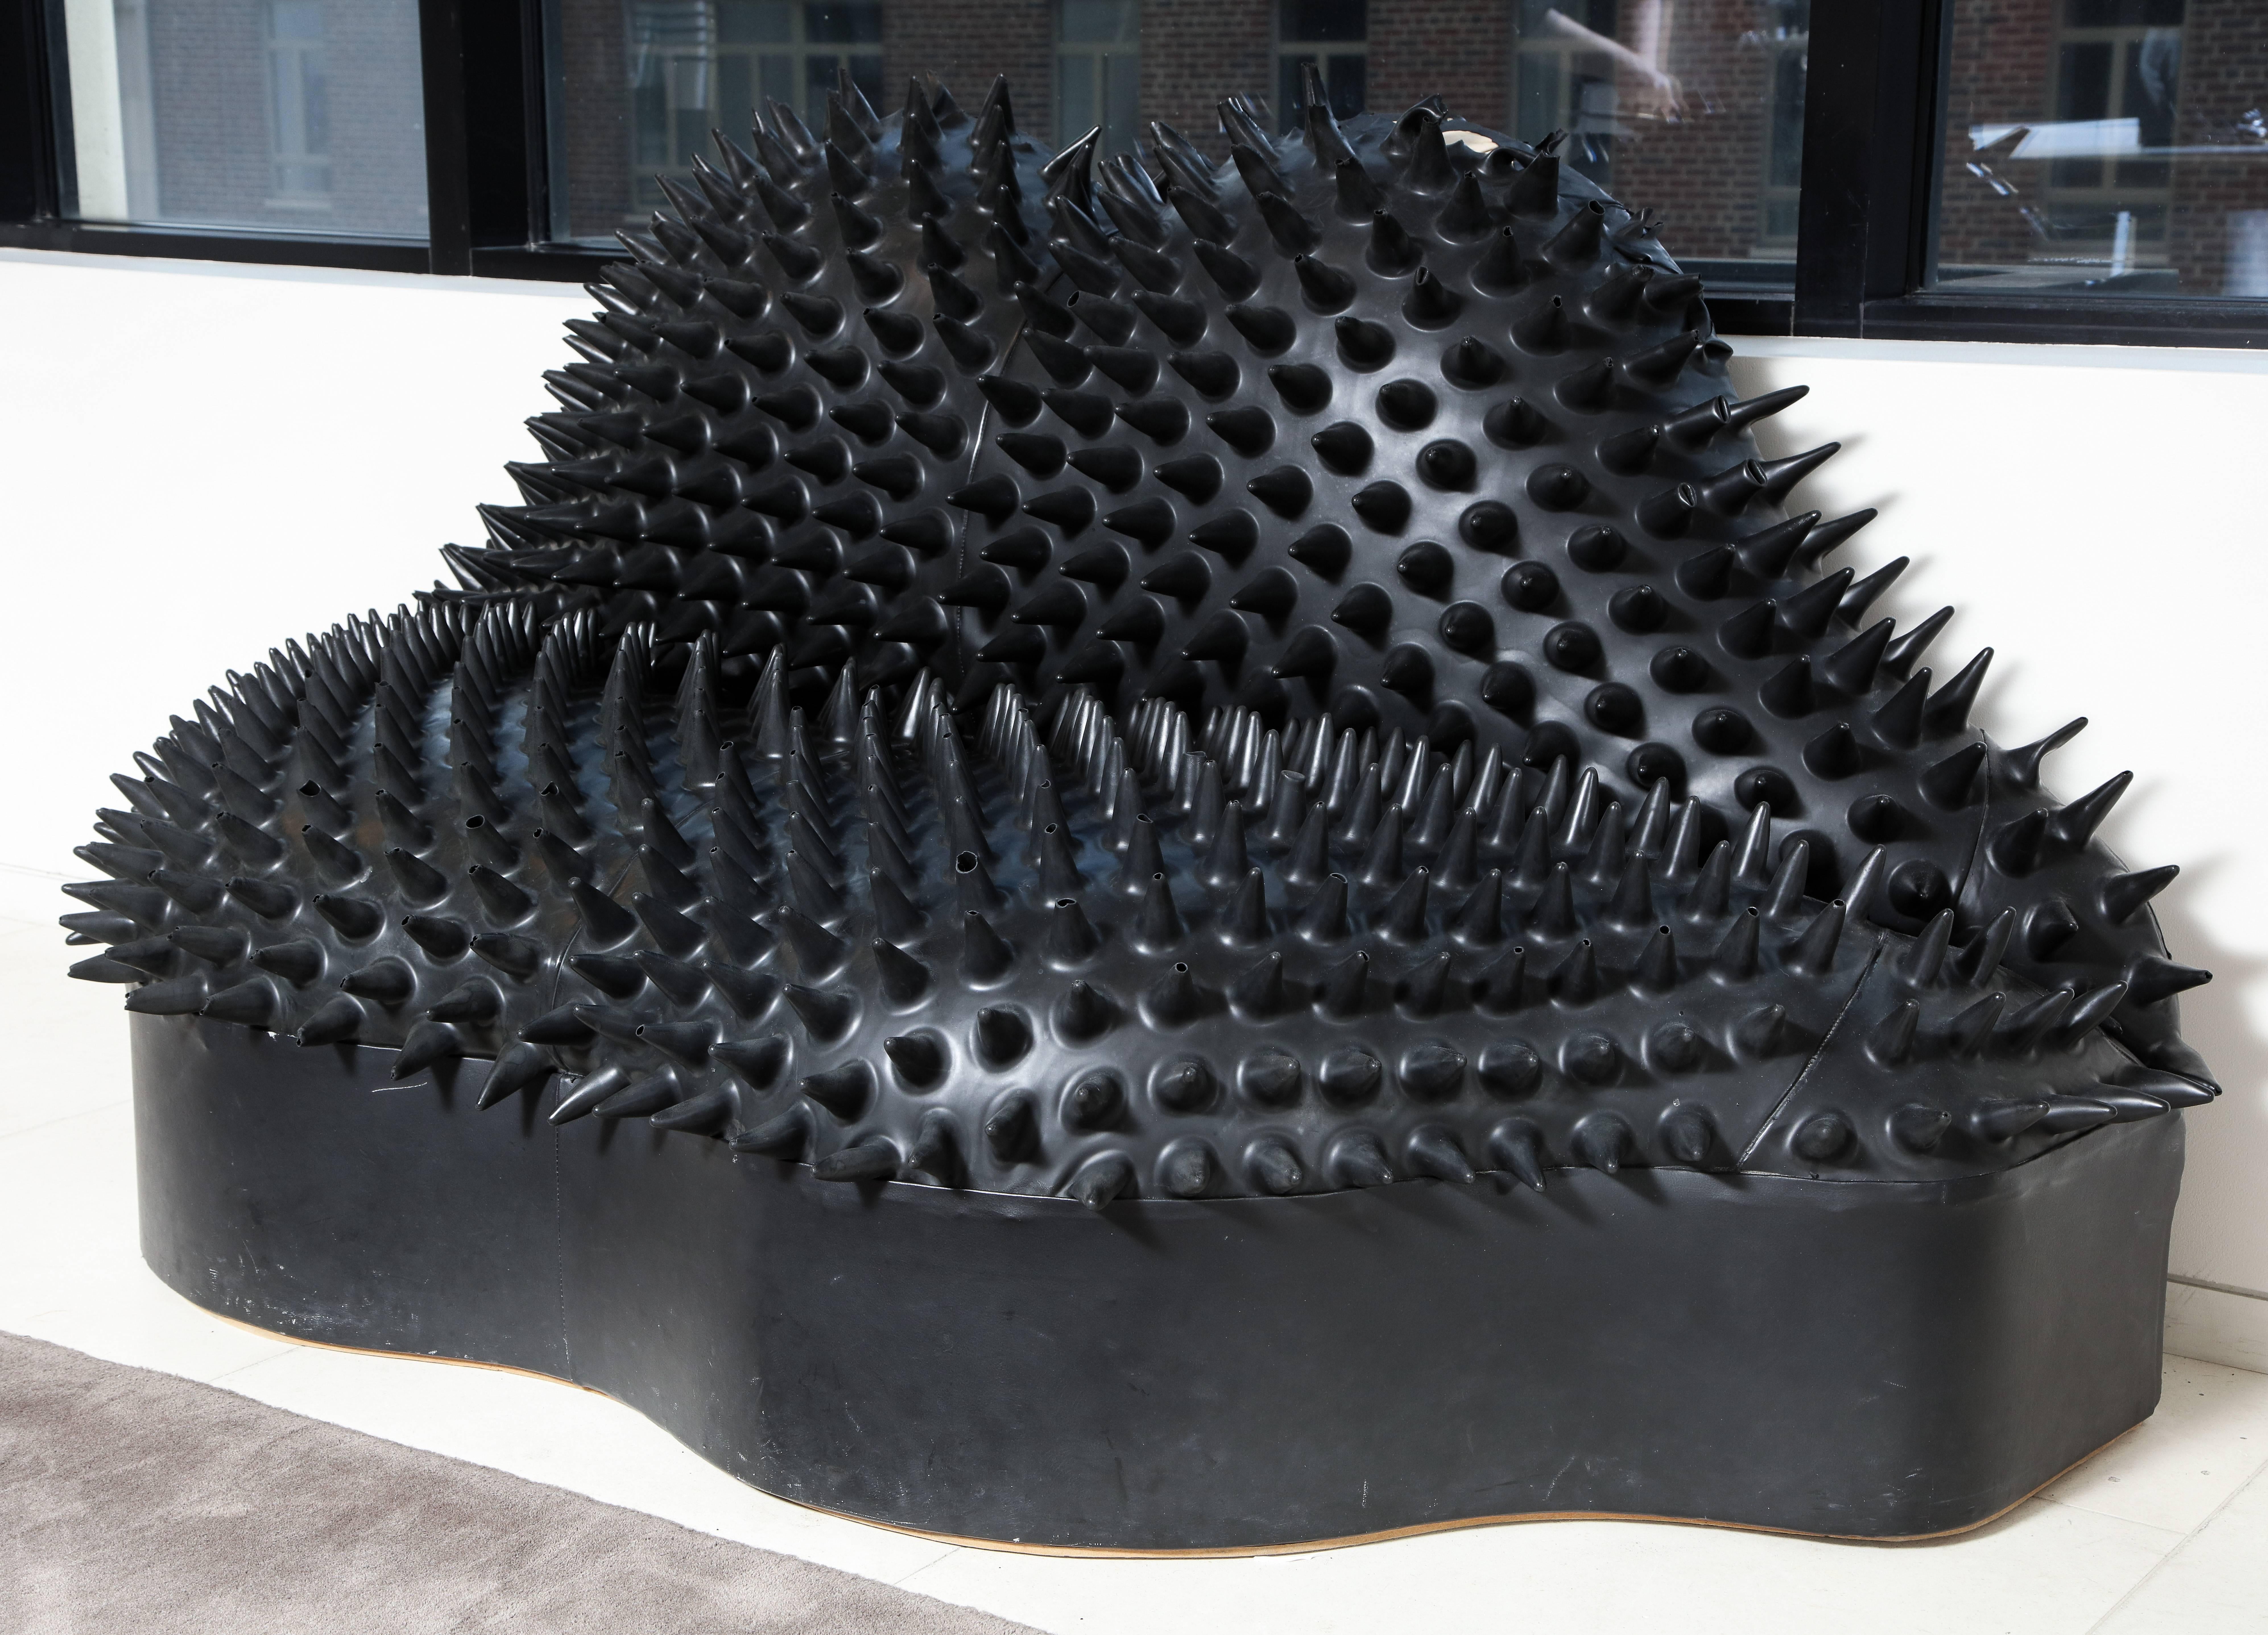 Designed by artistic director Craig Morrison for MTV Europe in 1990, only a few were made in black, red and grey. This lips shaped sofa is covered in soft spikey latex, a signature material of Morrison, with a flat nylon-upholstered back. From the